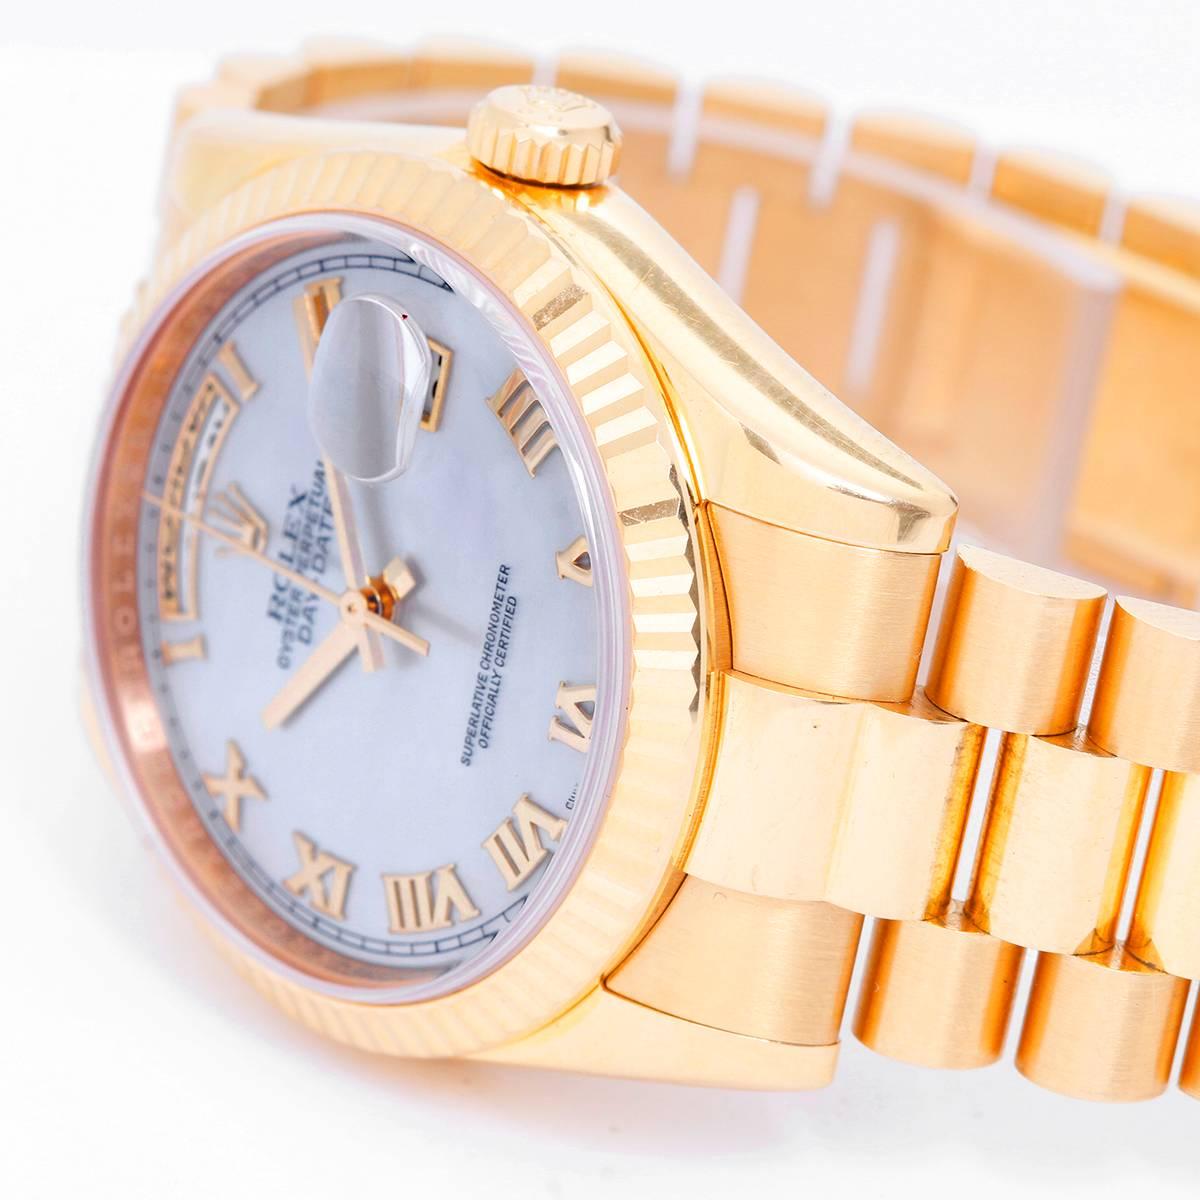 Rolex President Day-Date Men's 18k Gold Watch 118238 White Roman -  Automatic winding, 31 jewels, Quickset, sapphire crystal. 18k yellow gold case with fluted bezel (36mm diameter). Mother of pearl dial with raised gold Roman numerals. 18k yellow